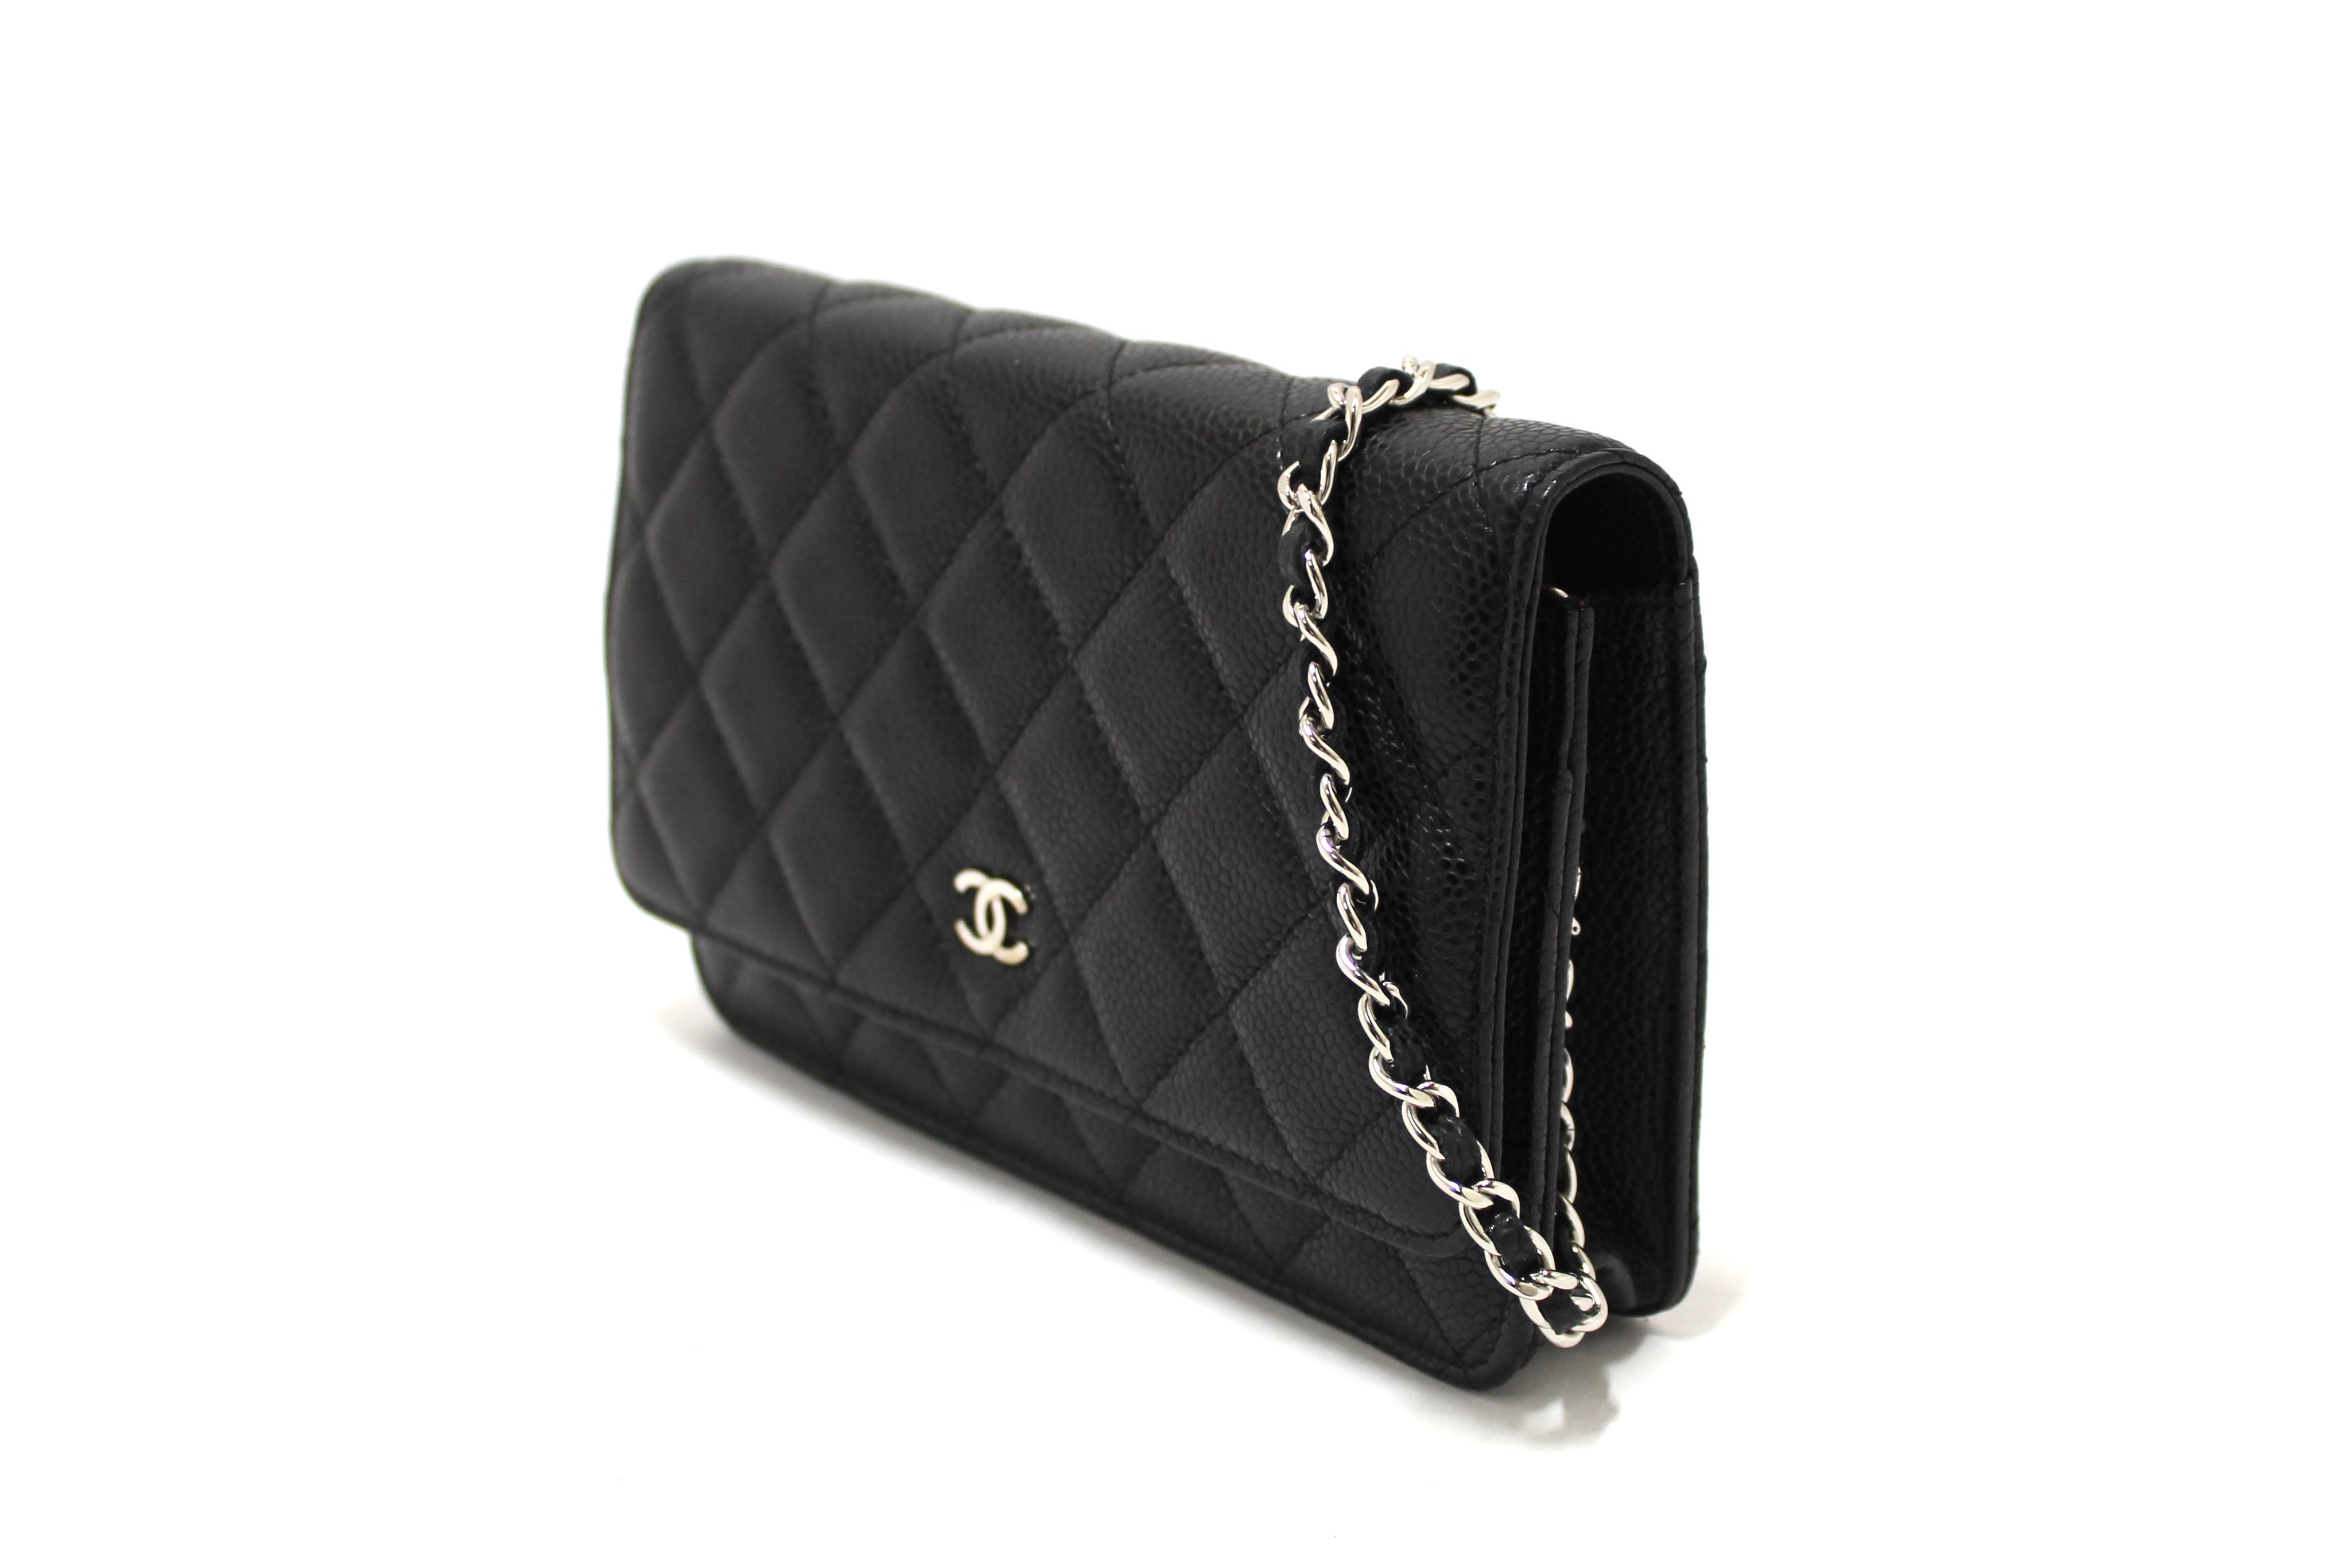 Authentic Chanel Black Quilted Caviar Leather Wallet On Chain WOC Messenger Bag